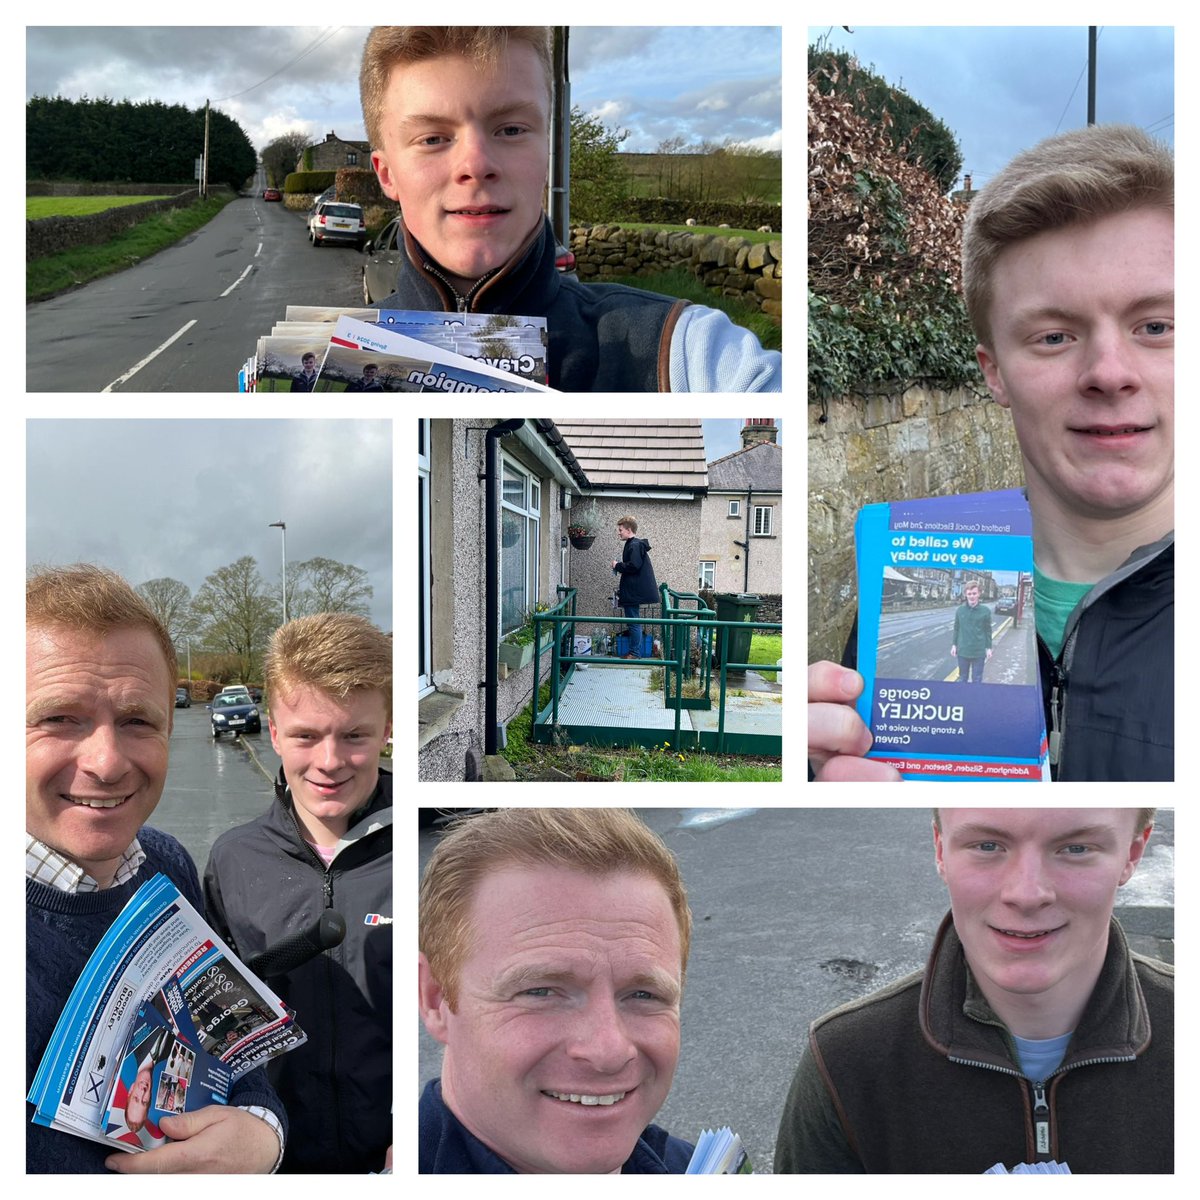 The best part about being a candidate has been getting out across Craven ward over the last few weeks alongside @_RobbieMoore , delivering my latest leaflet and talking to people on the doorstep.
#torycanvass #torydoorstep #walking2win